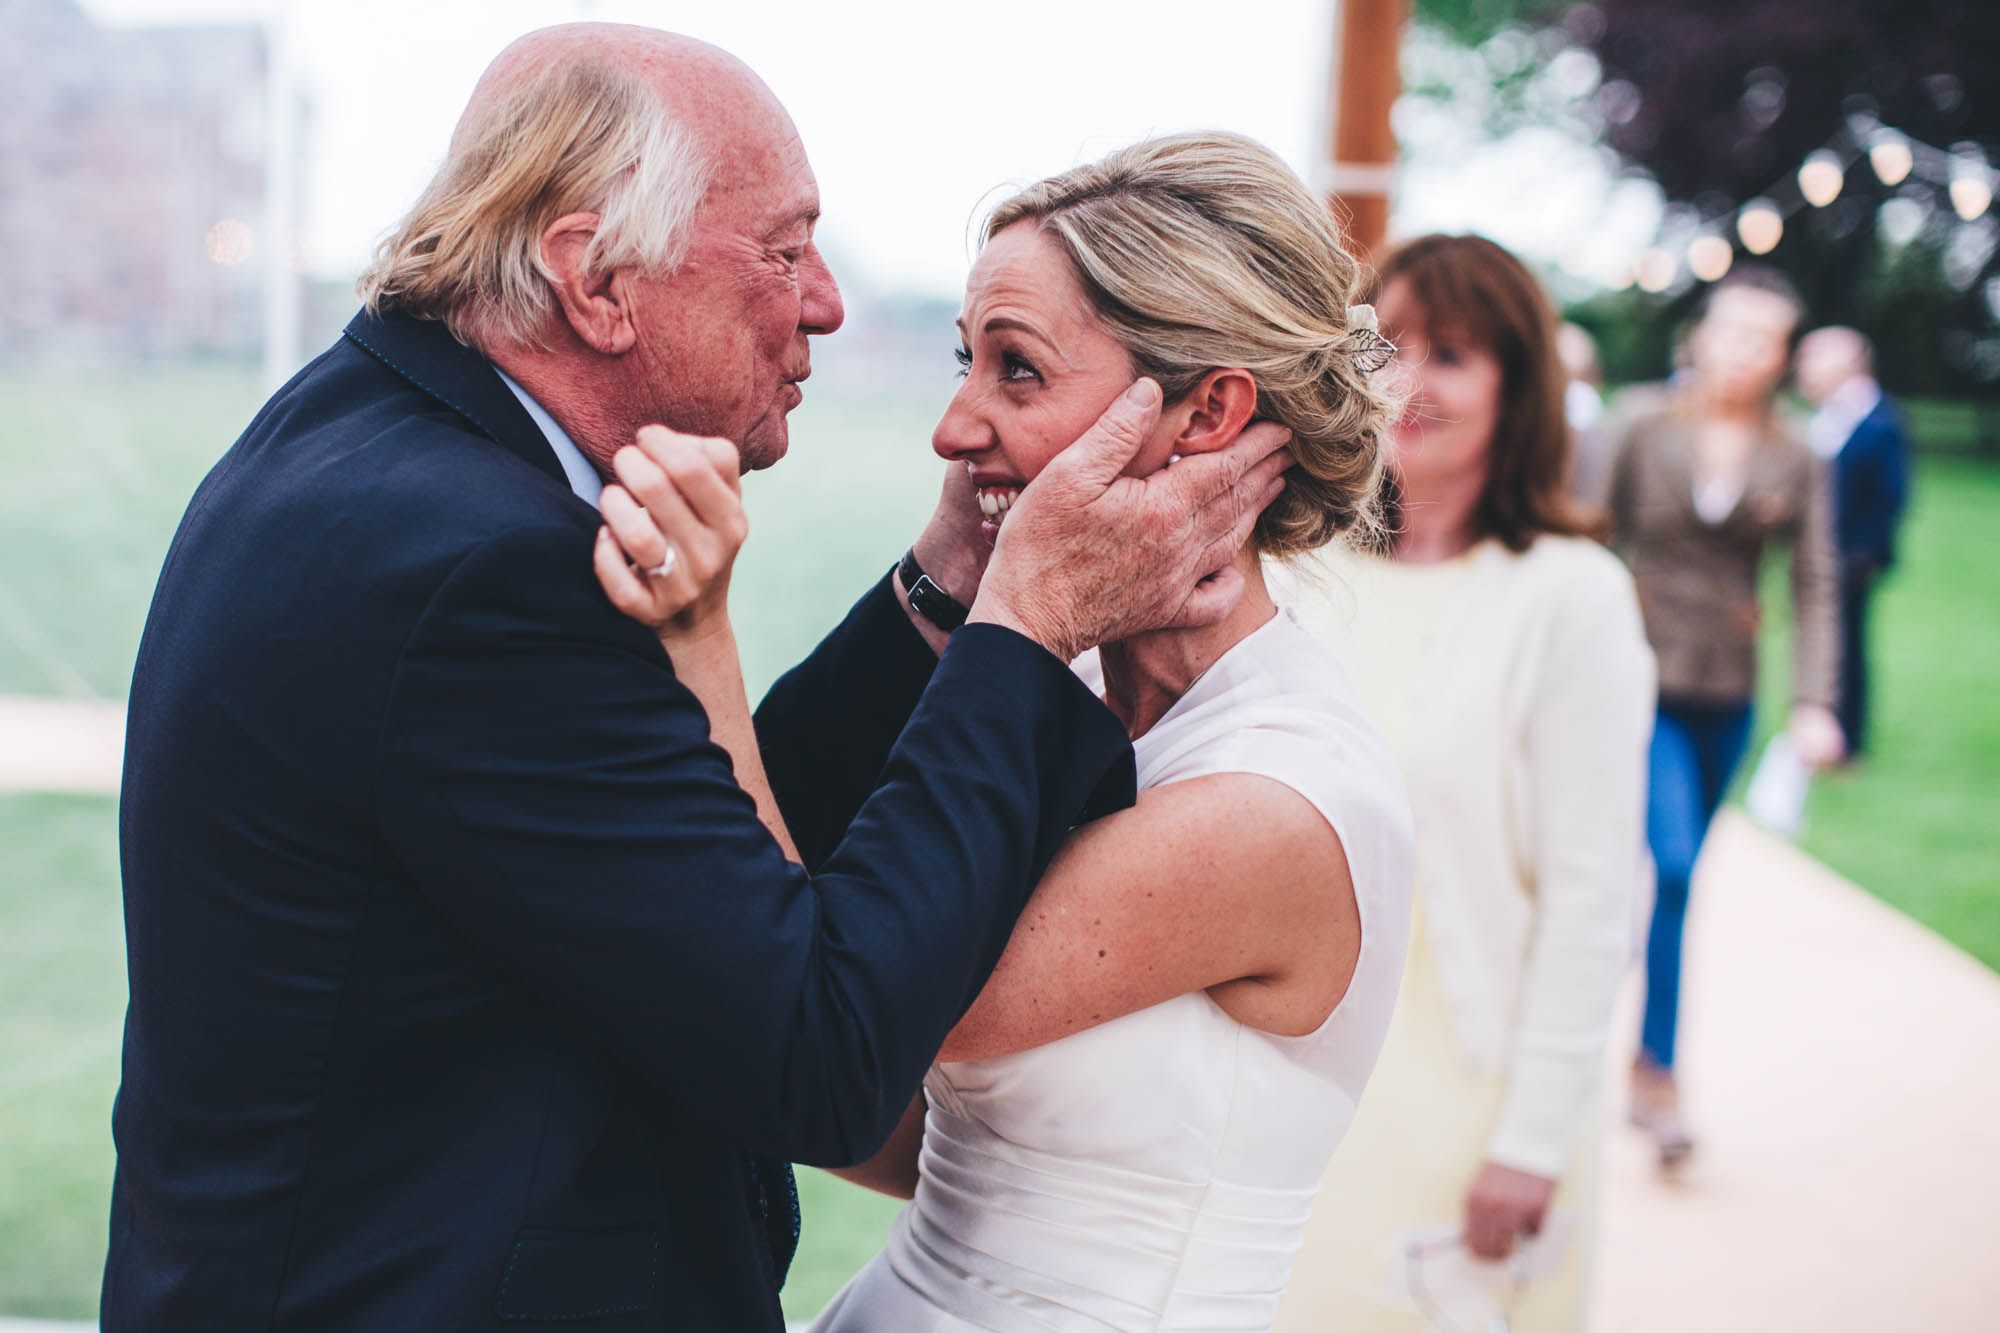 grandad in a really sweet and emotional embrace with the bride